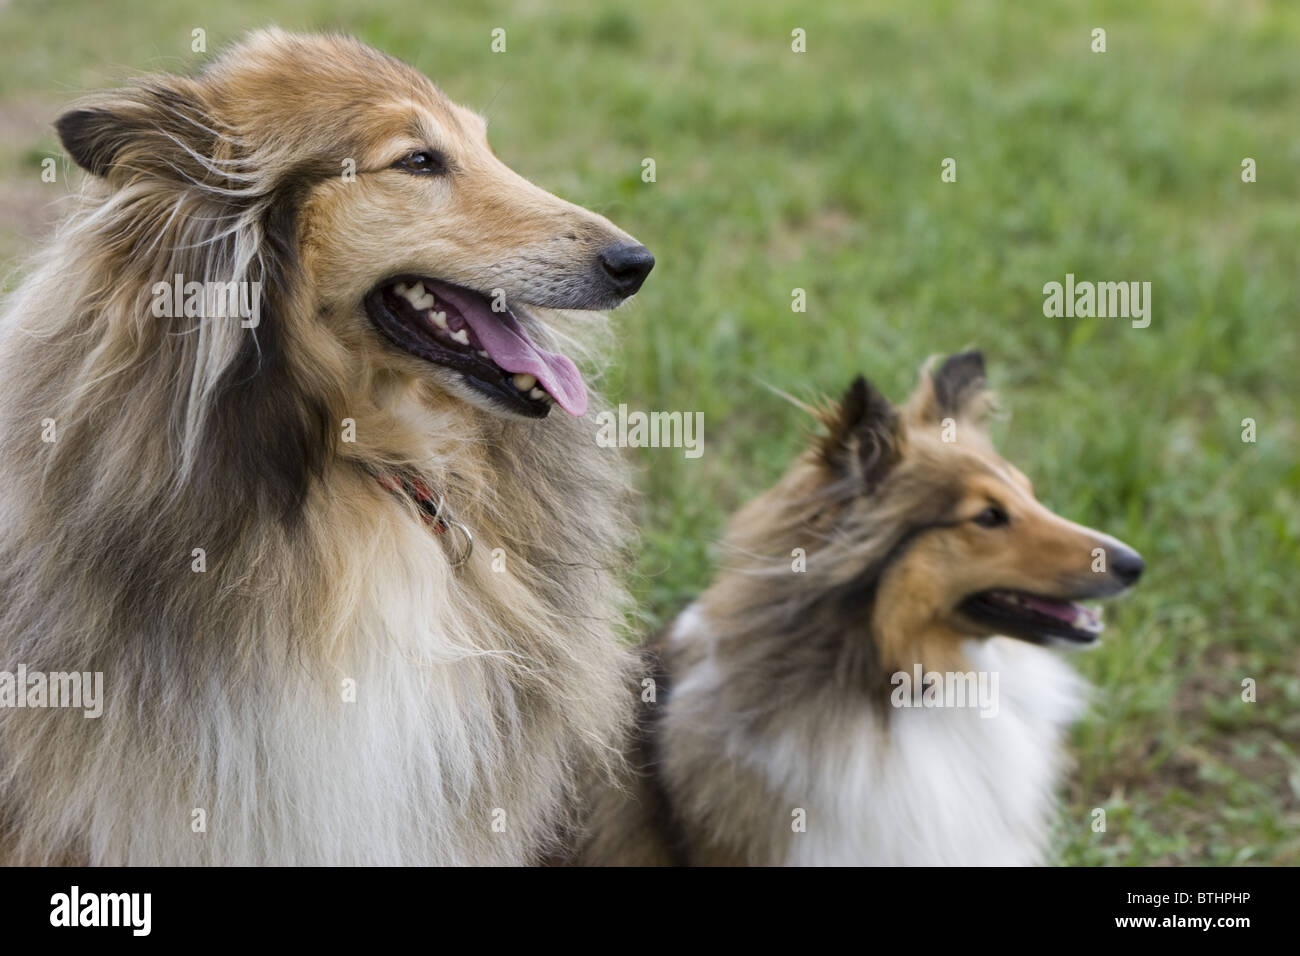 Rough Collie also called Long-Haired Collie, a long-coated breed medium to large size dog, and a Shetland sheepdog. Look similar,but different breeds. Stock Photo